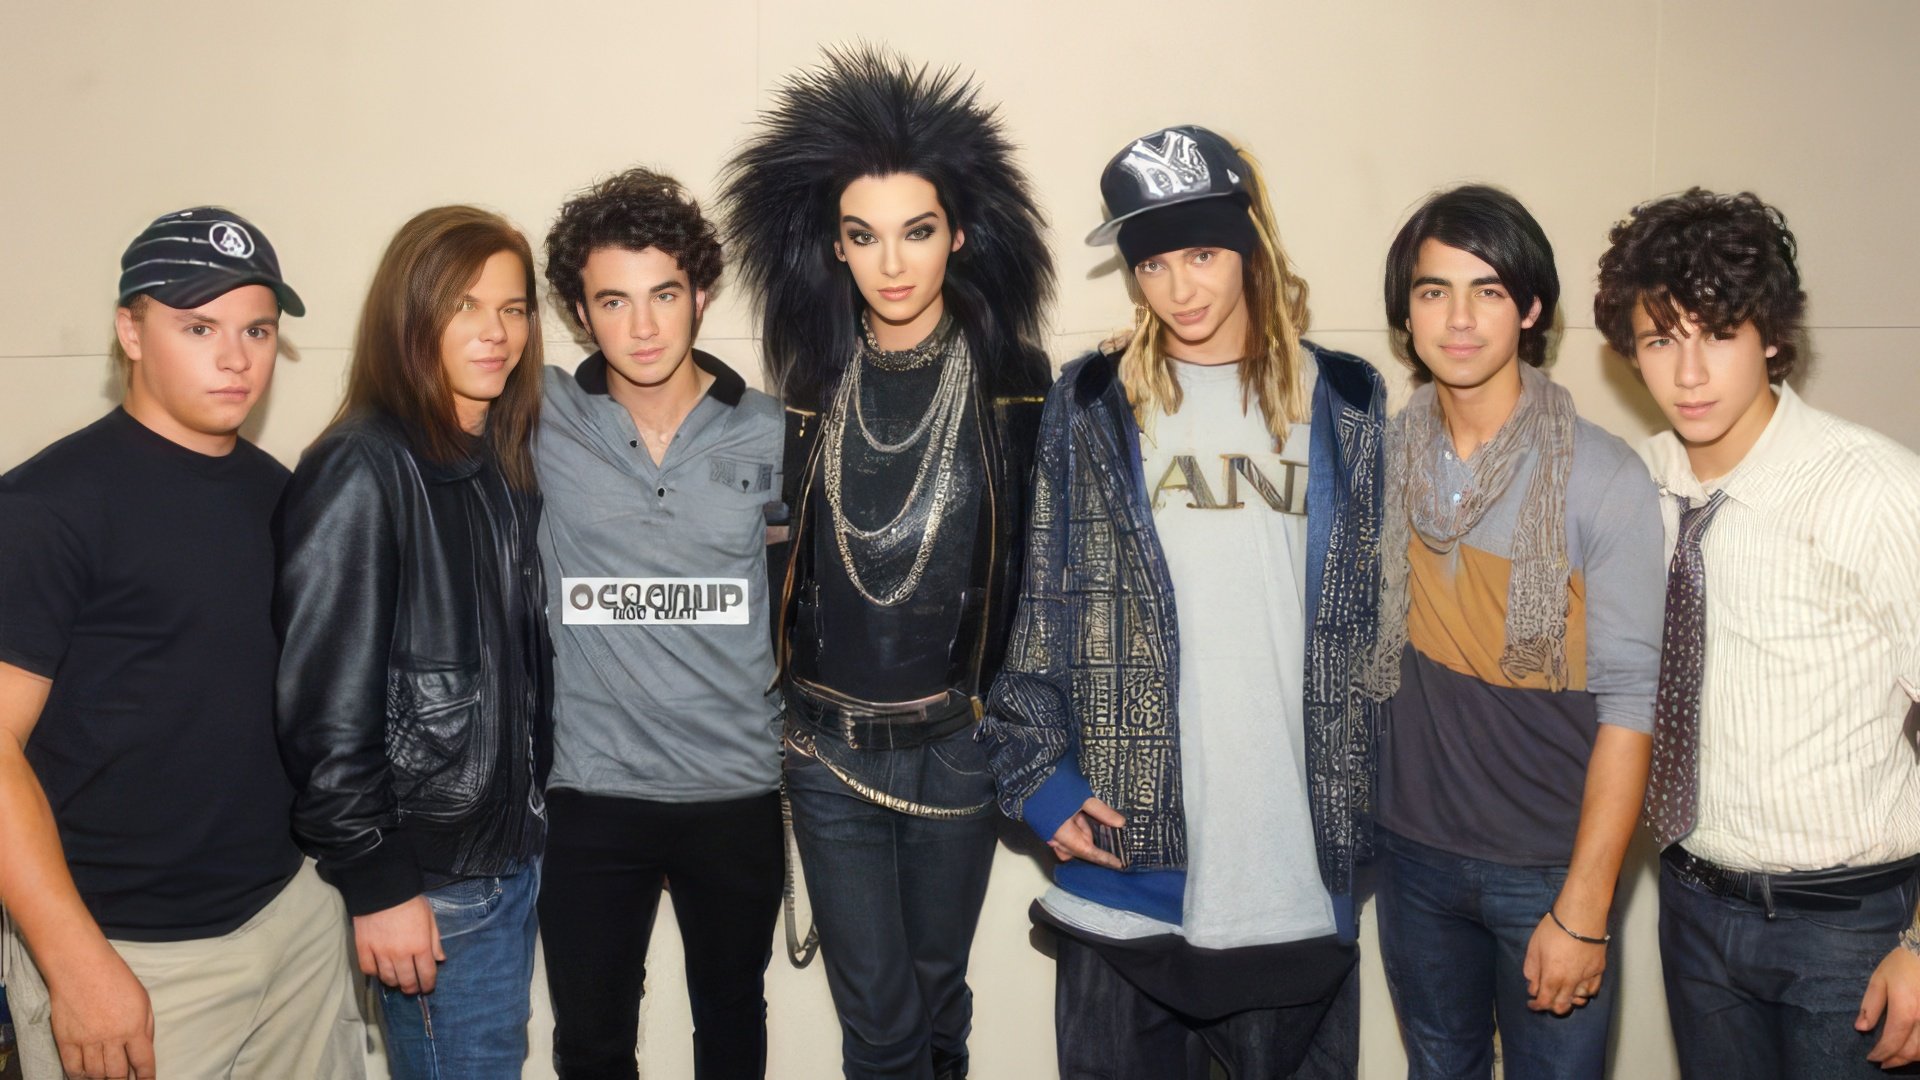 Initially, they opened for popular bands (pictured with Tokio Hotel)